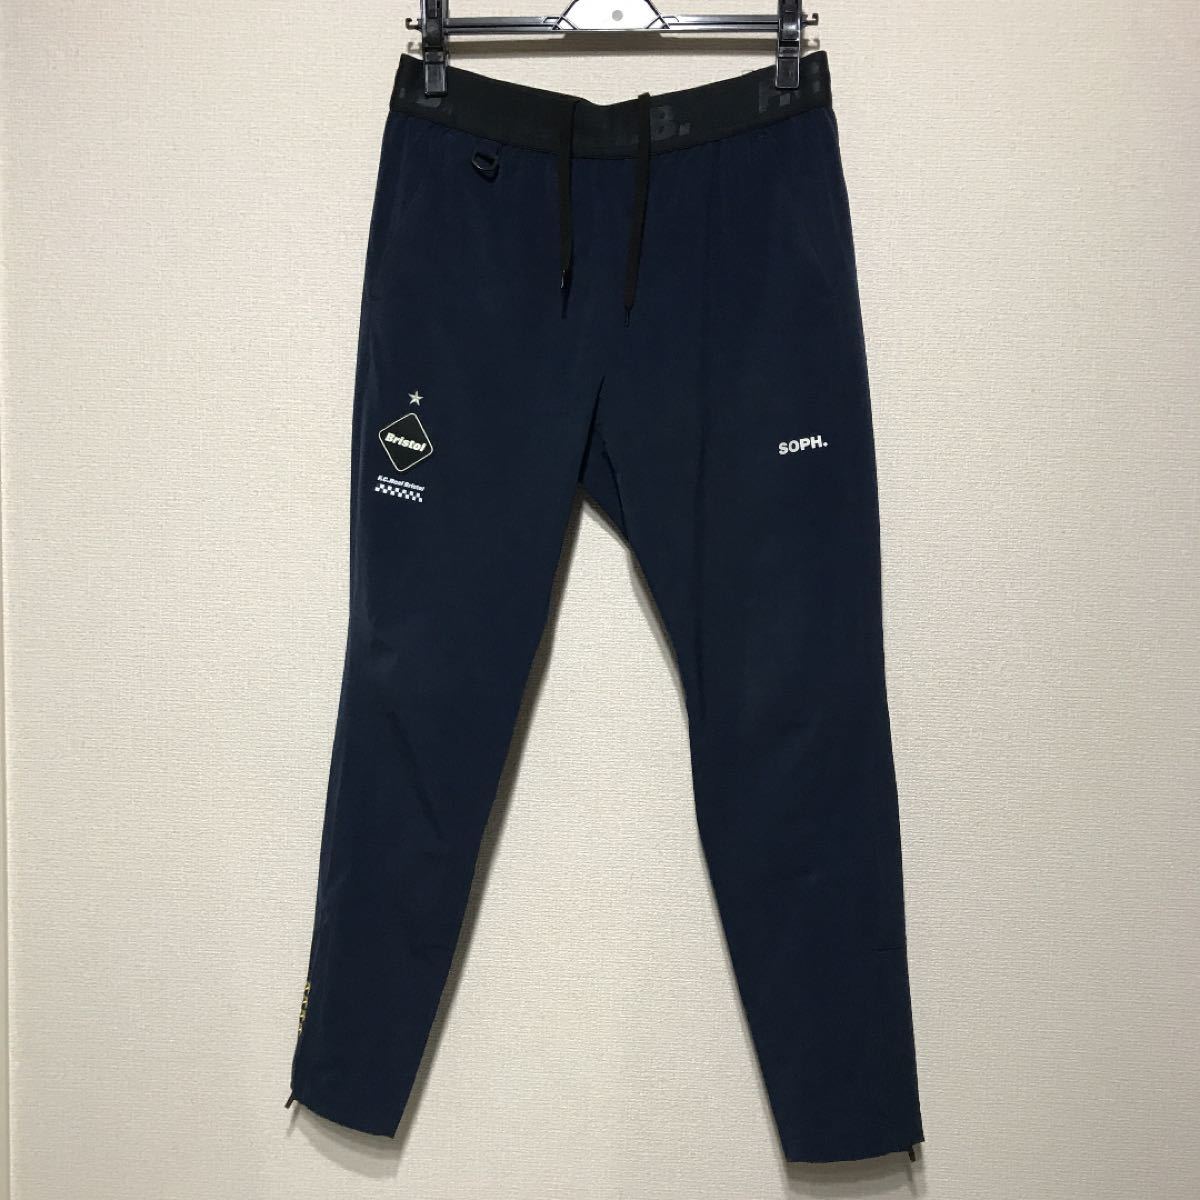 F C R B STRETCH LIGHT WEIGHT EASY PANTS｜PayPayフリマ